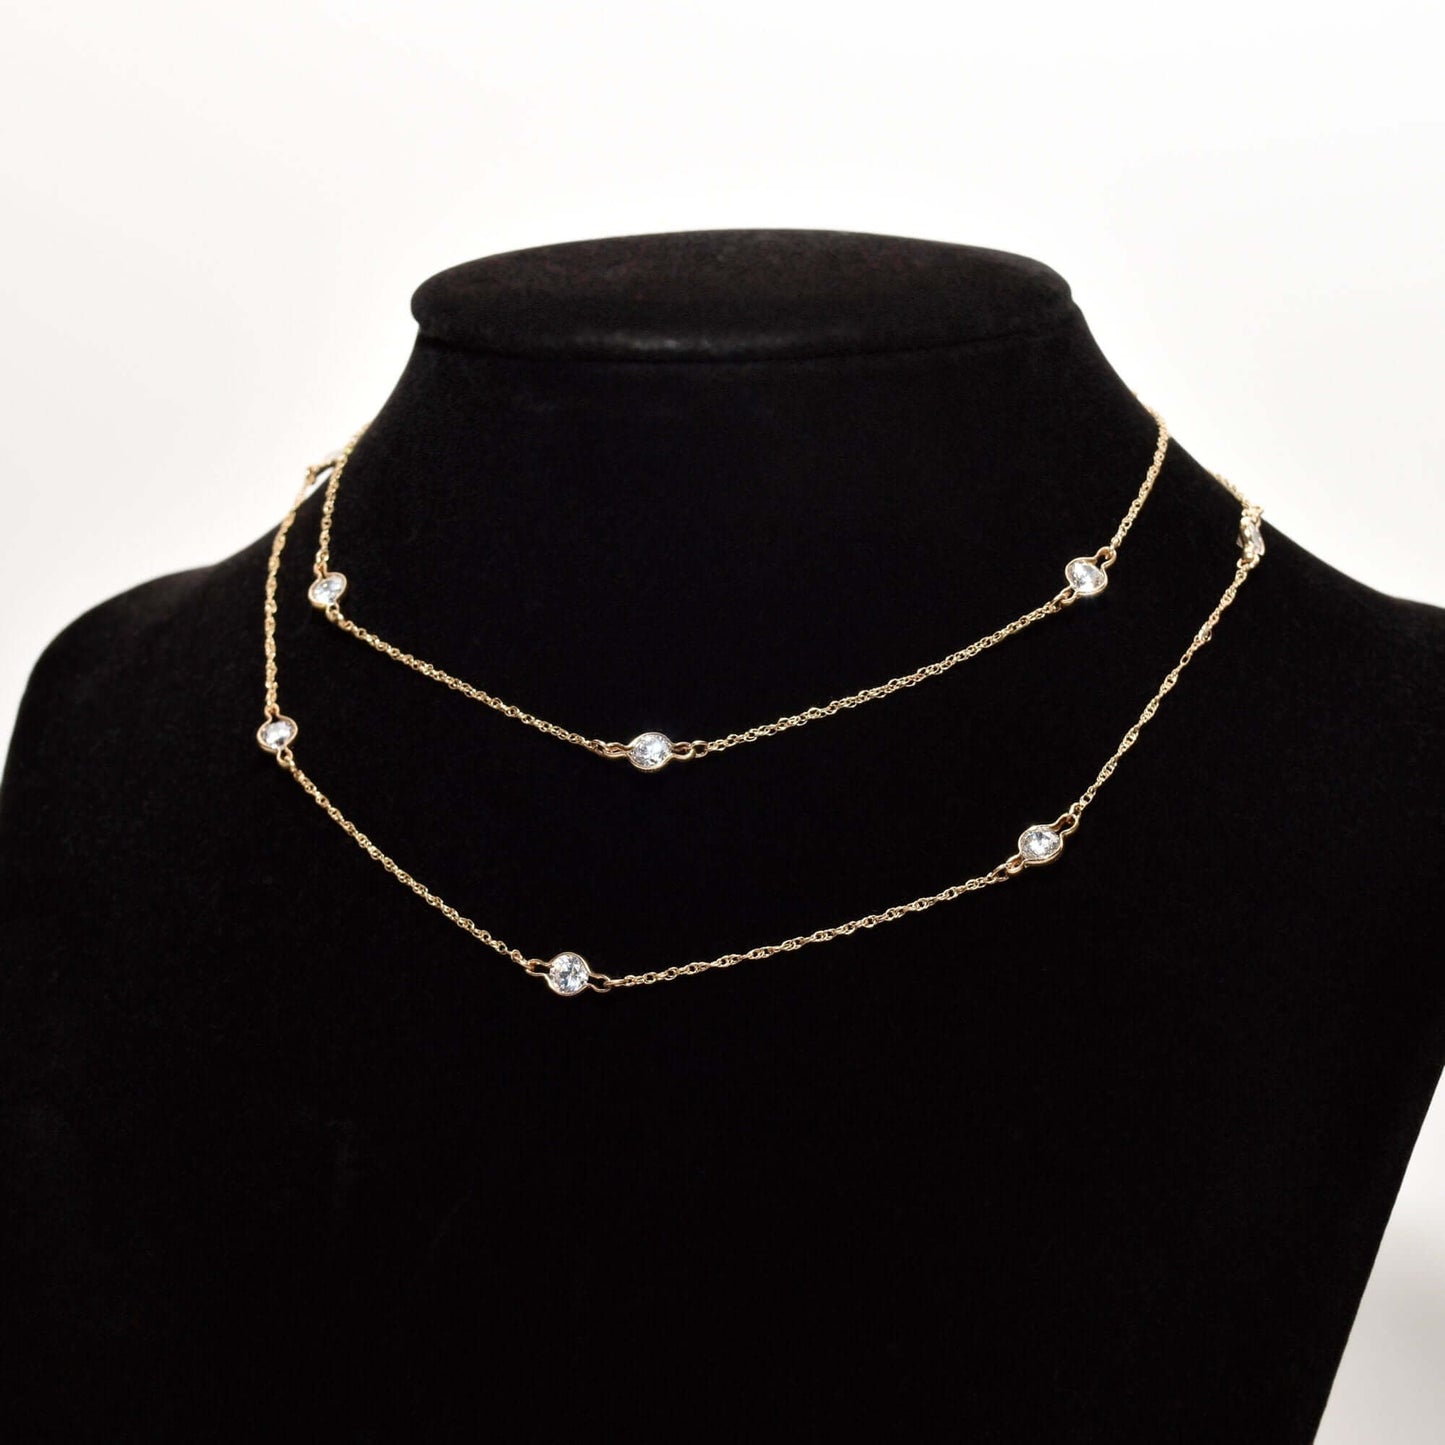 CZ Diamond Station Necklace In 14K Yellow Gold, Bezel Strand Loose Rope Chain, Estate Jewelry, 24" L